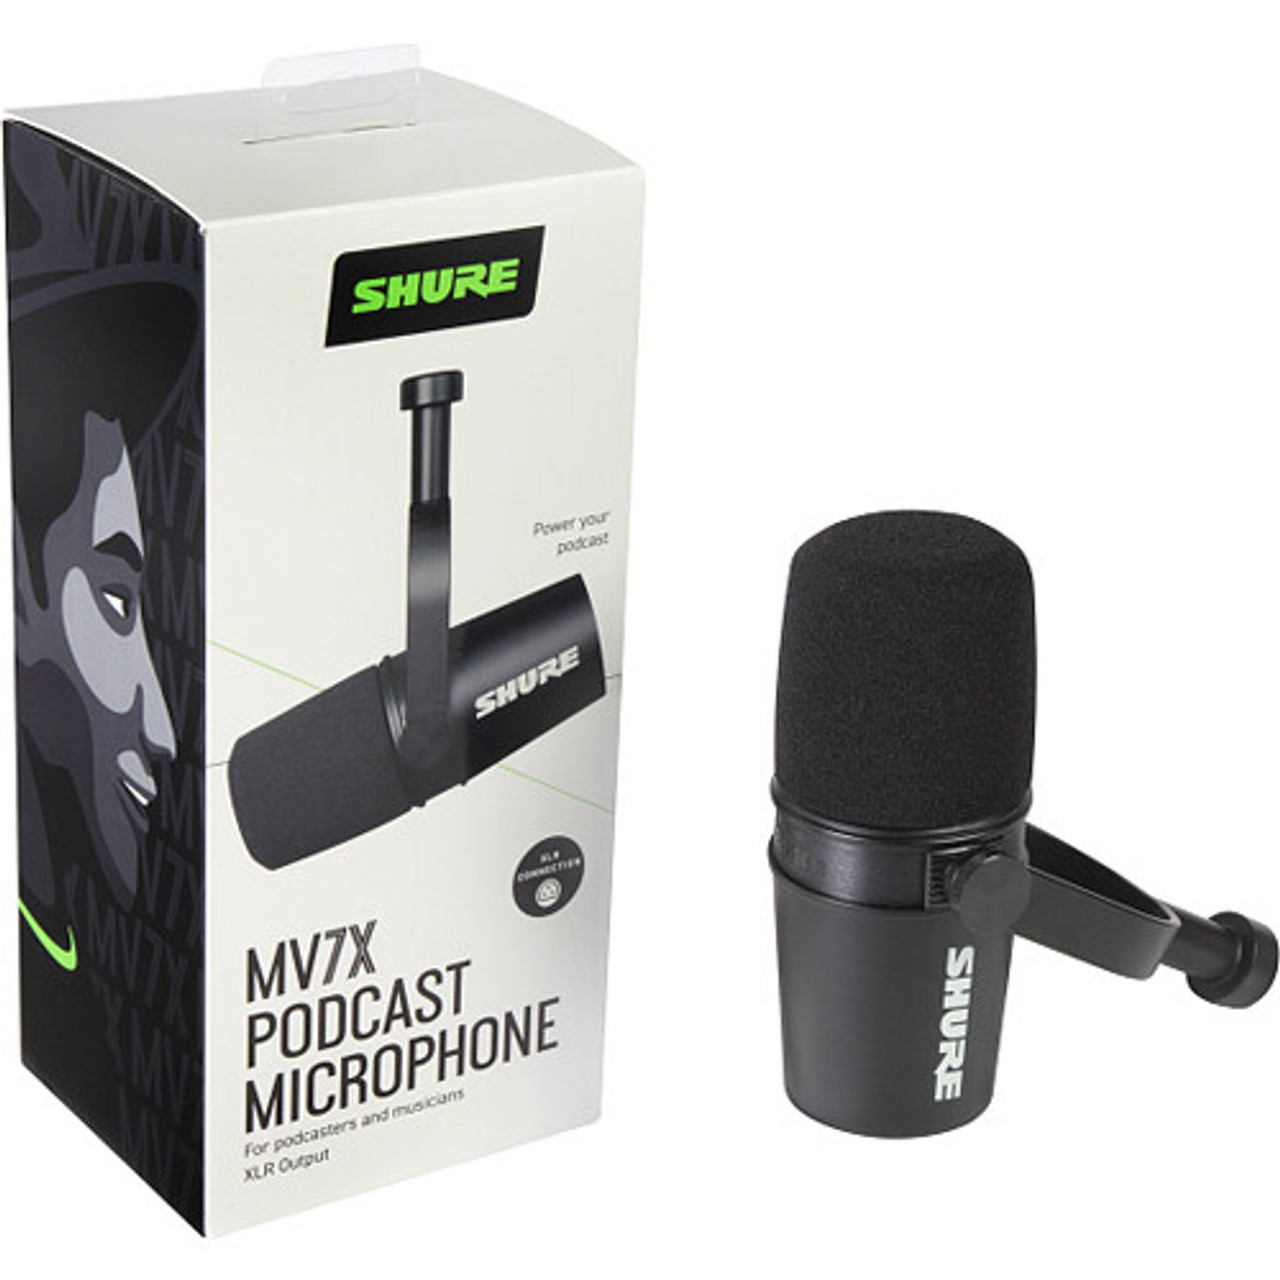 Shure MV7 Review: A New Podcast Industry Favourite?